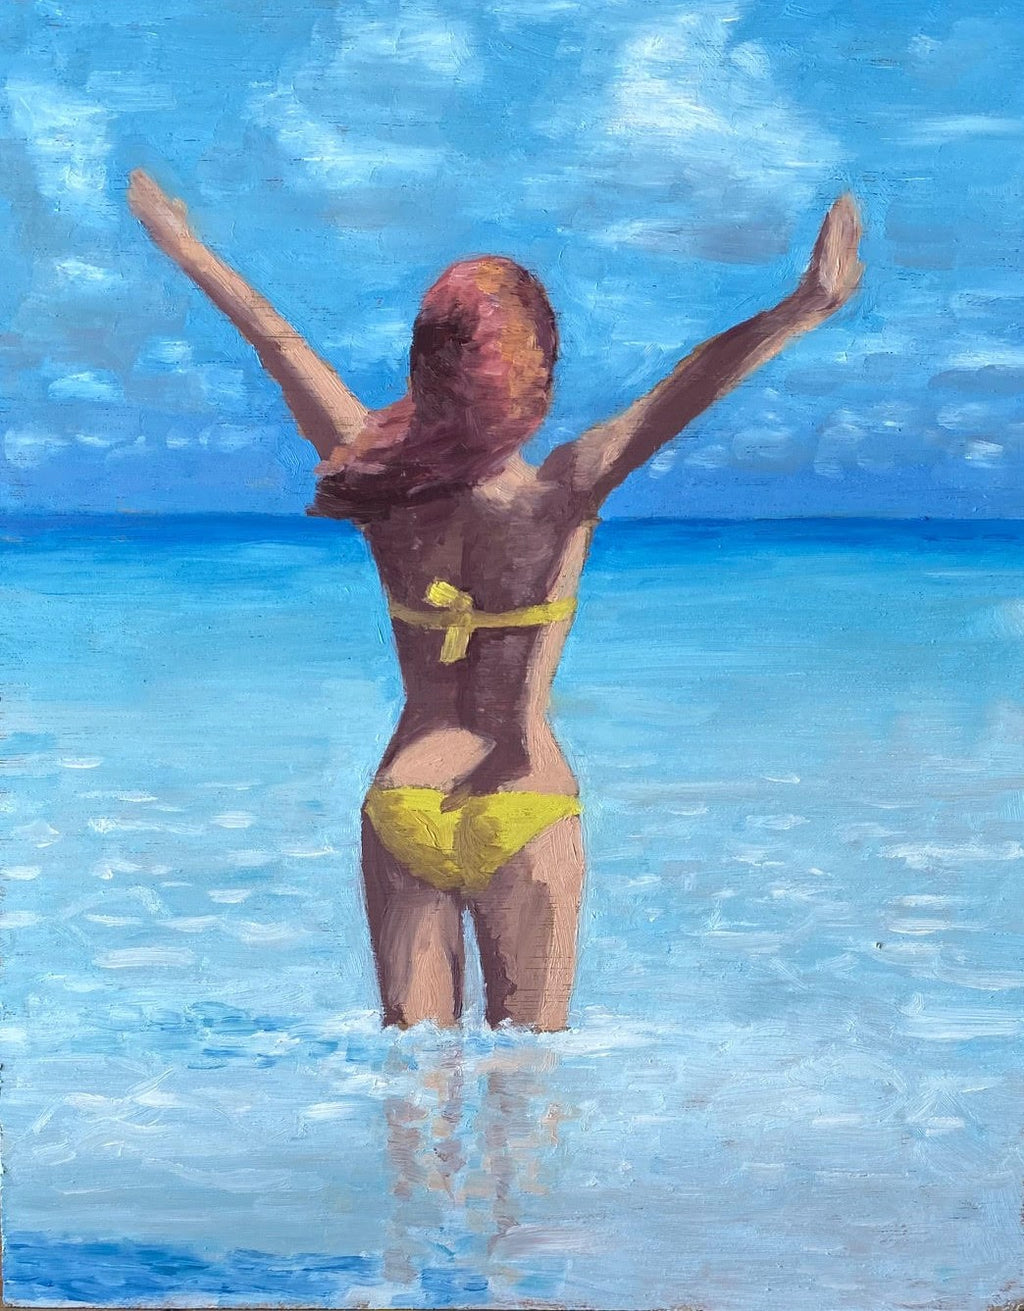 This picture features a happy woman wading into the ocean. An original oil painting by Steve Sandborg Art